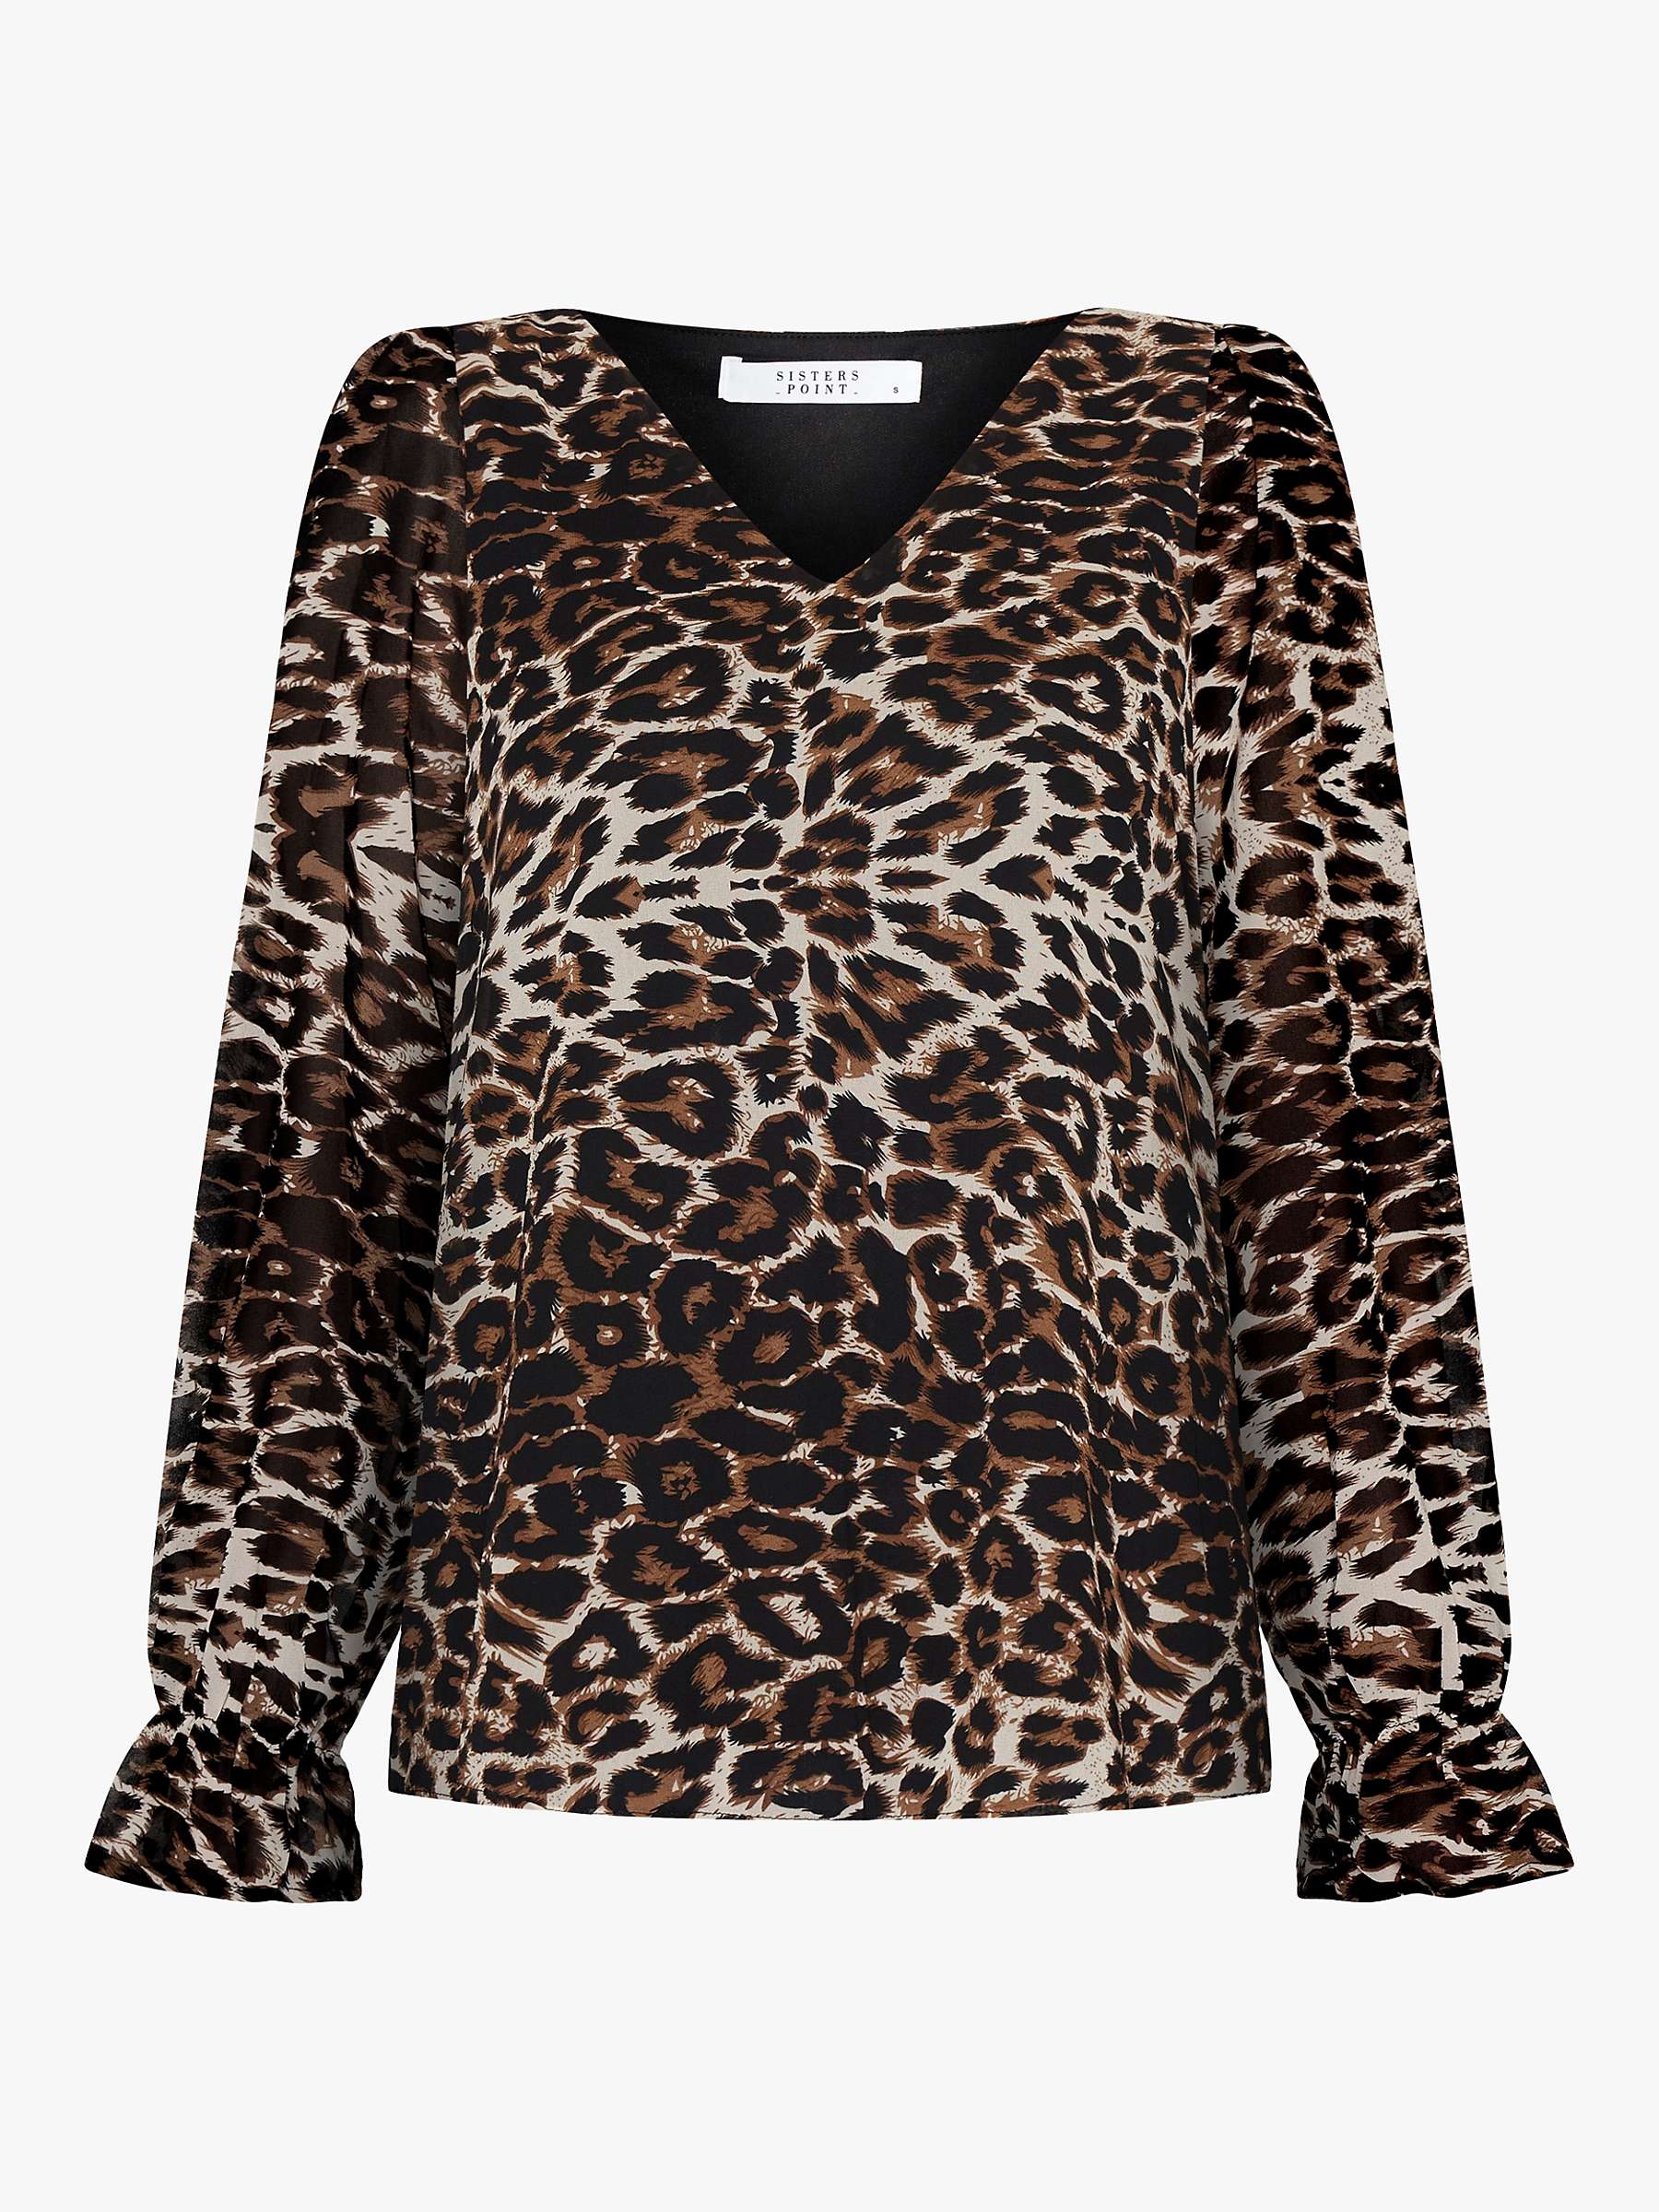 Buy Sisters Point Frill Animal Print Blouse, Leo Online at johnlewis.com